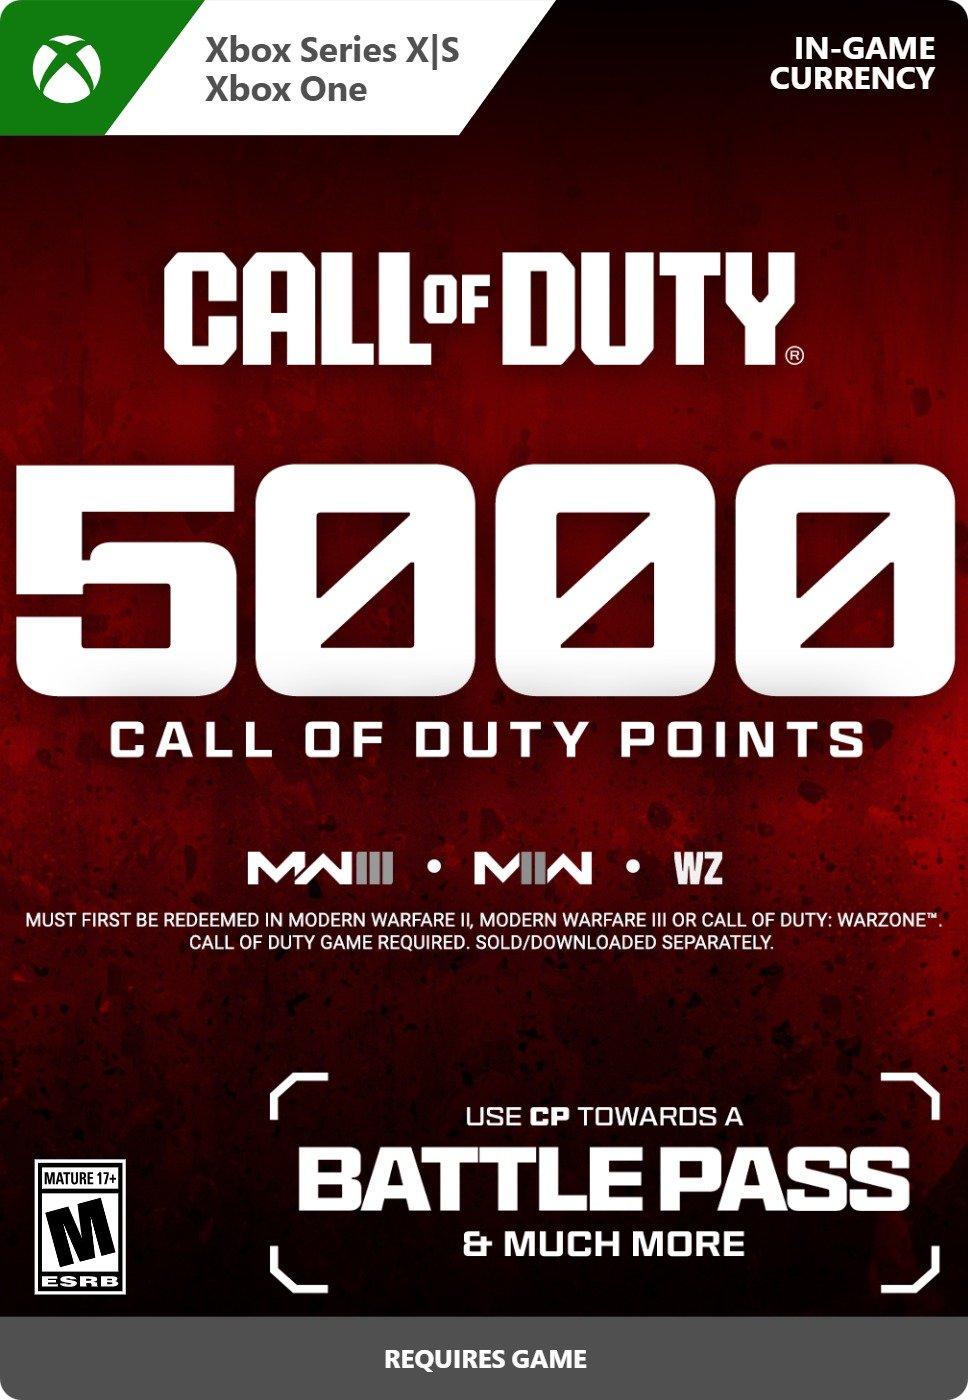 Call of Duty Points 5,000